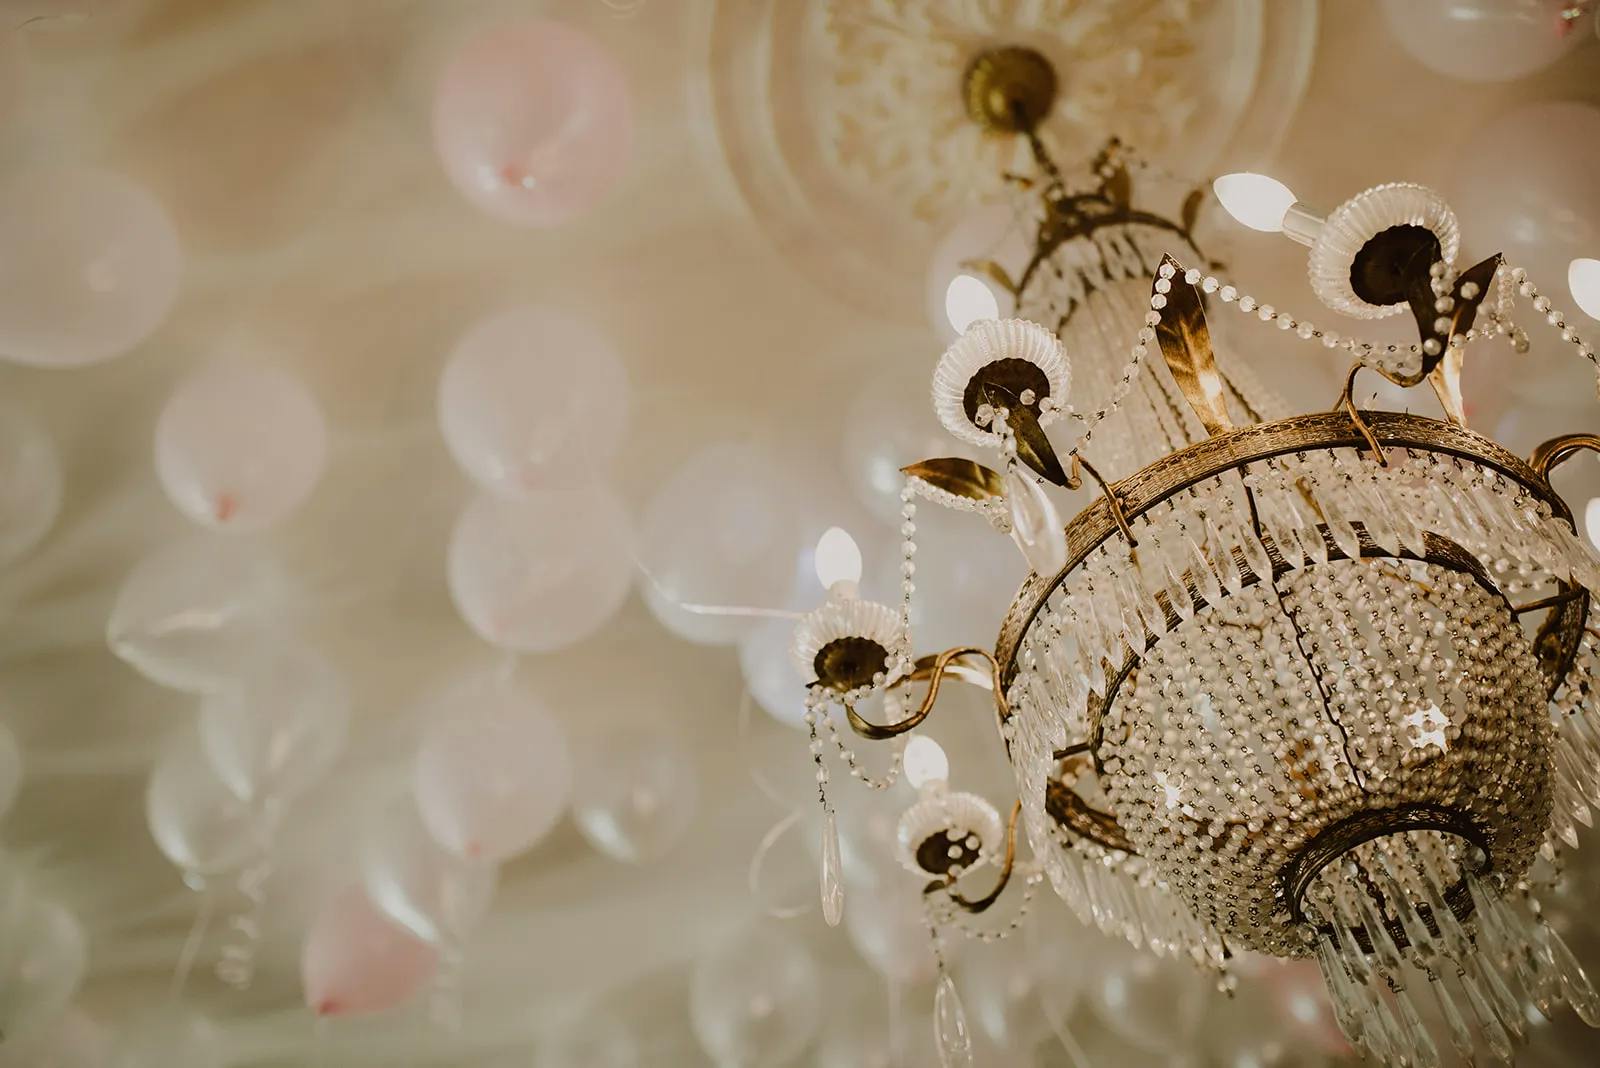 An ornate crystal chandelier with lit bulbs hangs from a ceiling decorated with white and pink balloons. The chandelier features intricate details and gold accents, adding an elegant touch to the festive ambiance.